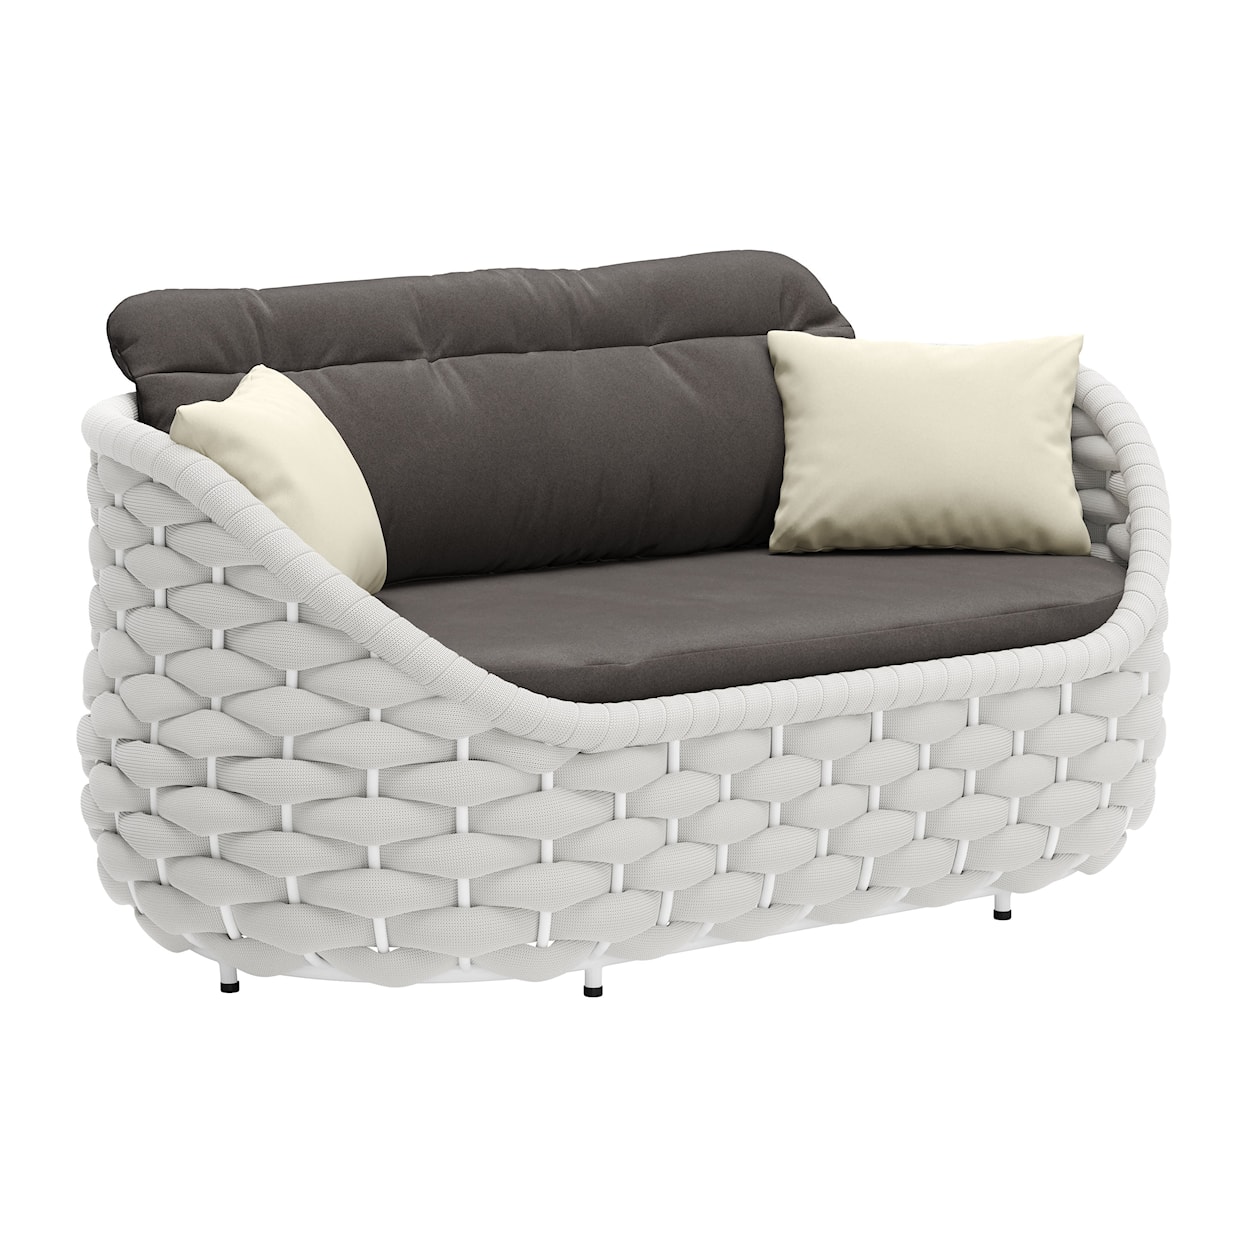 Zuo Coral Reef Collection Loveseat